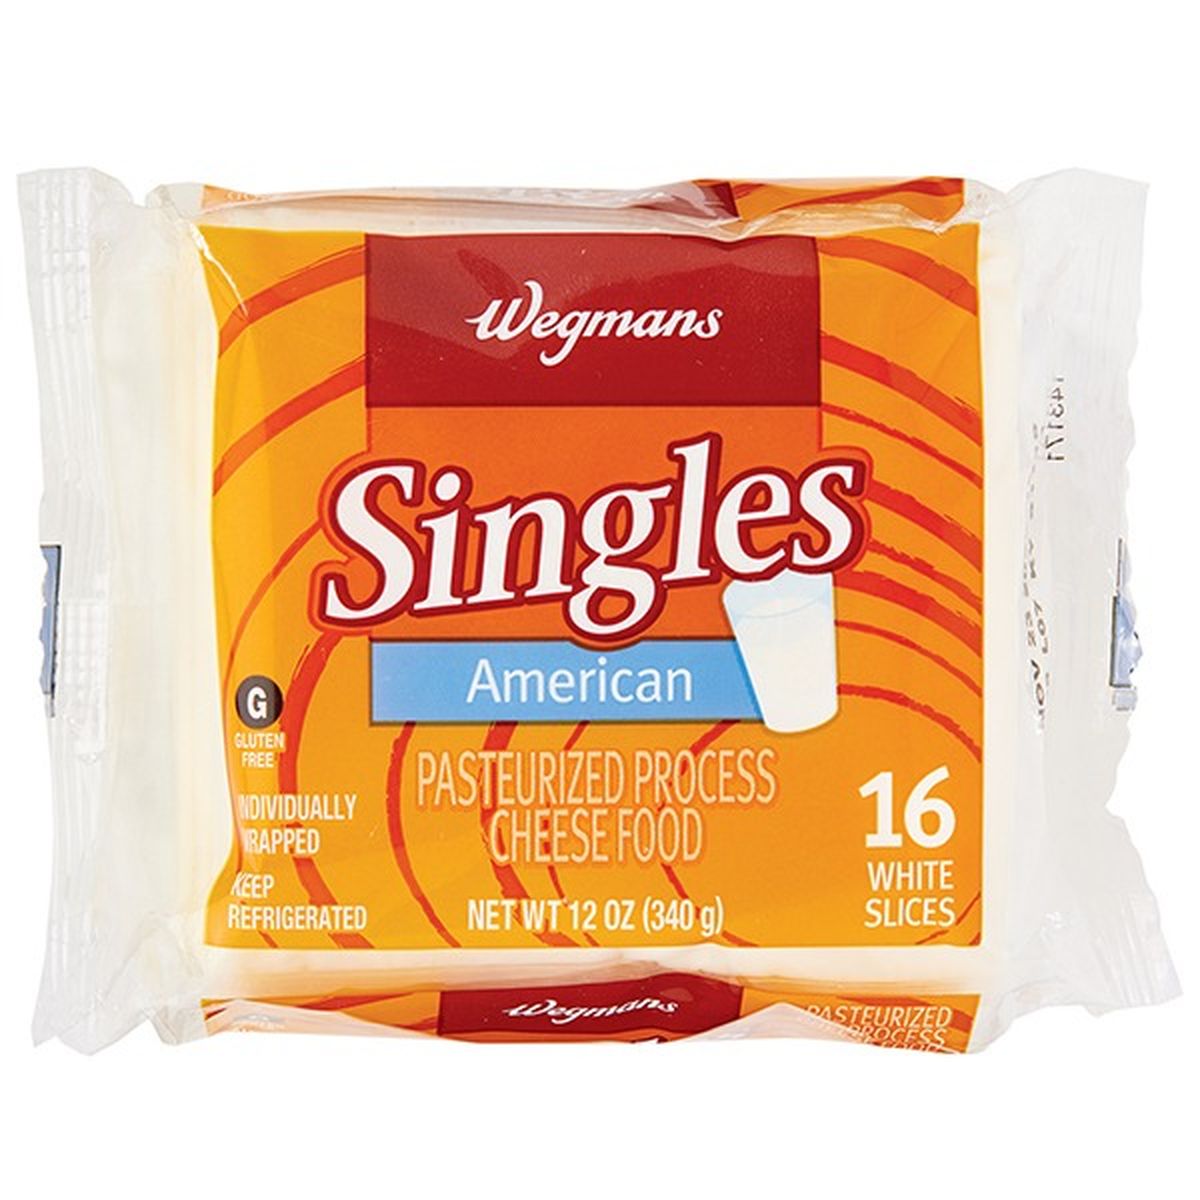 Calories in Wegmans Cheese, Food Singles, American White Slices